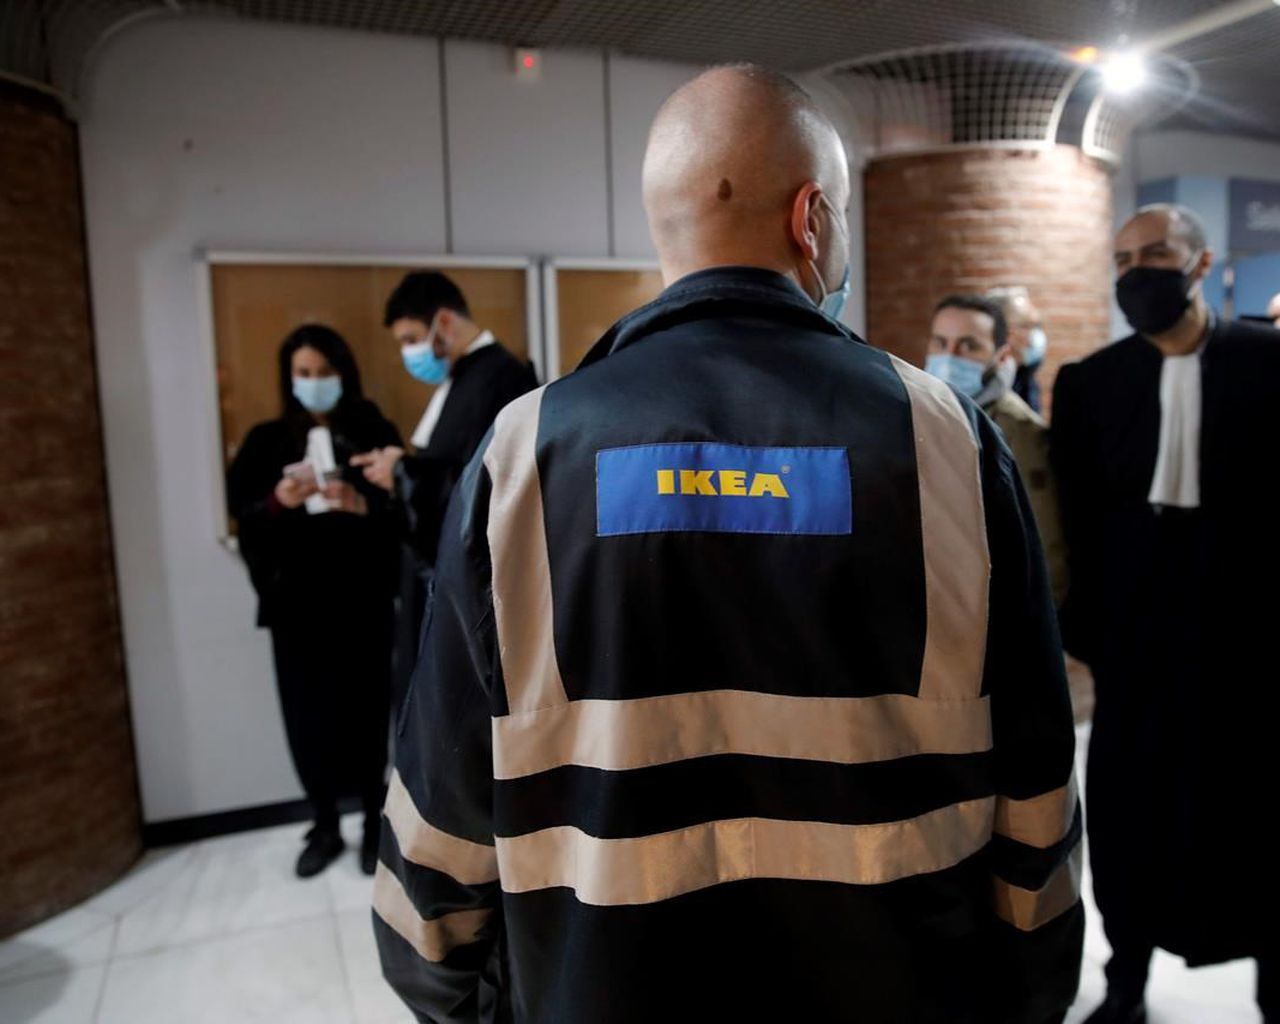 IKEA's management in France is on trial for spying on its own employees